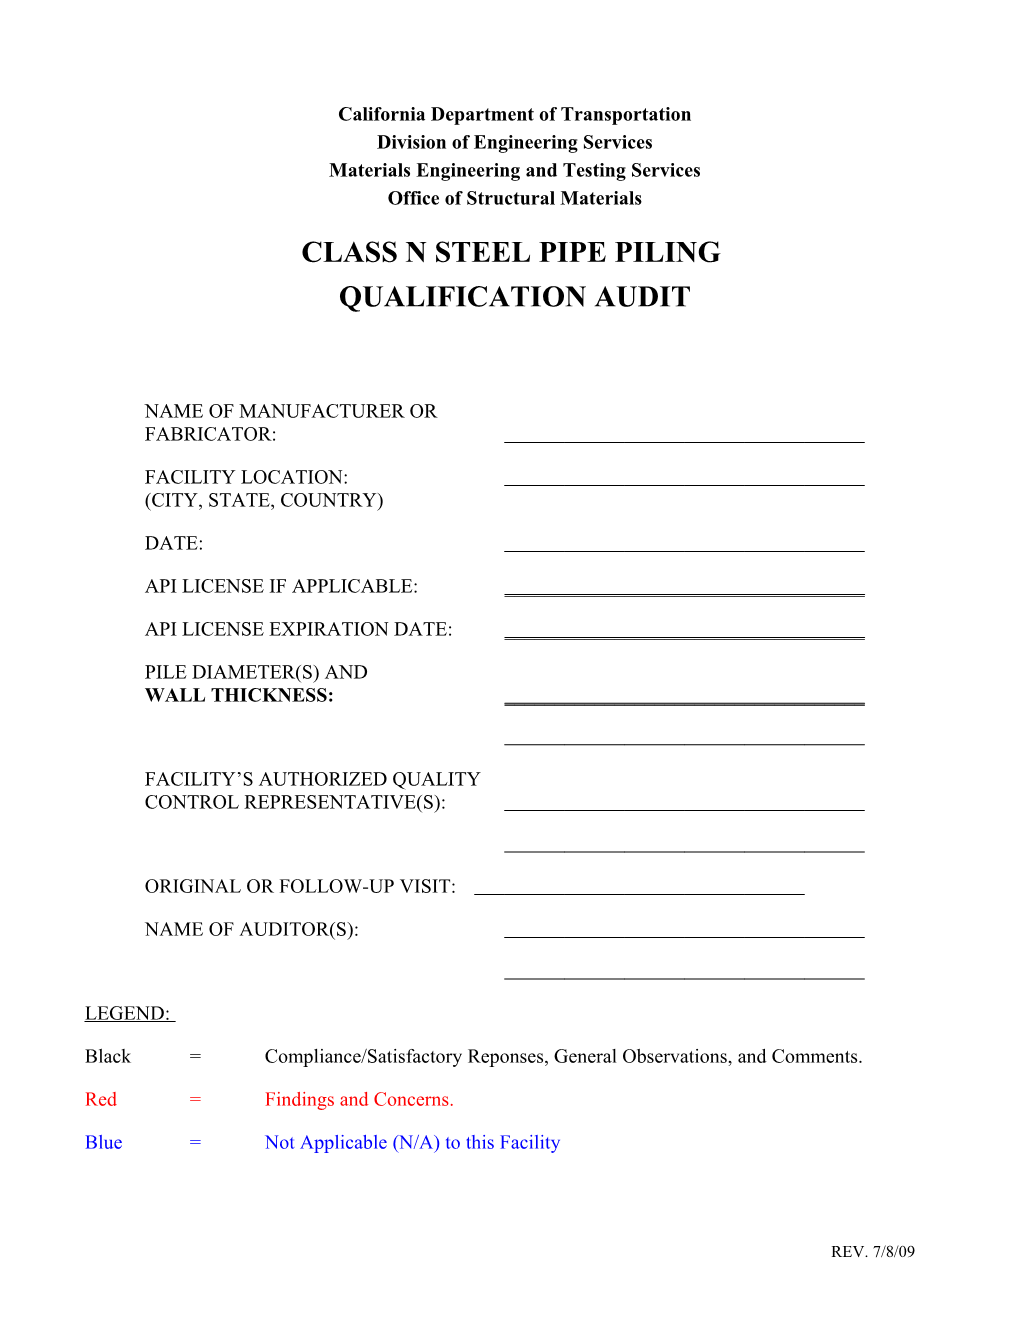 Manufacturing Qualification Audit for Over Head Sign and Pole Structures